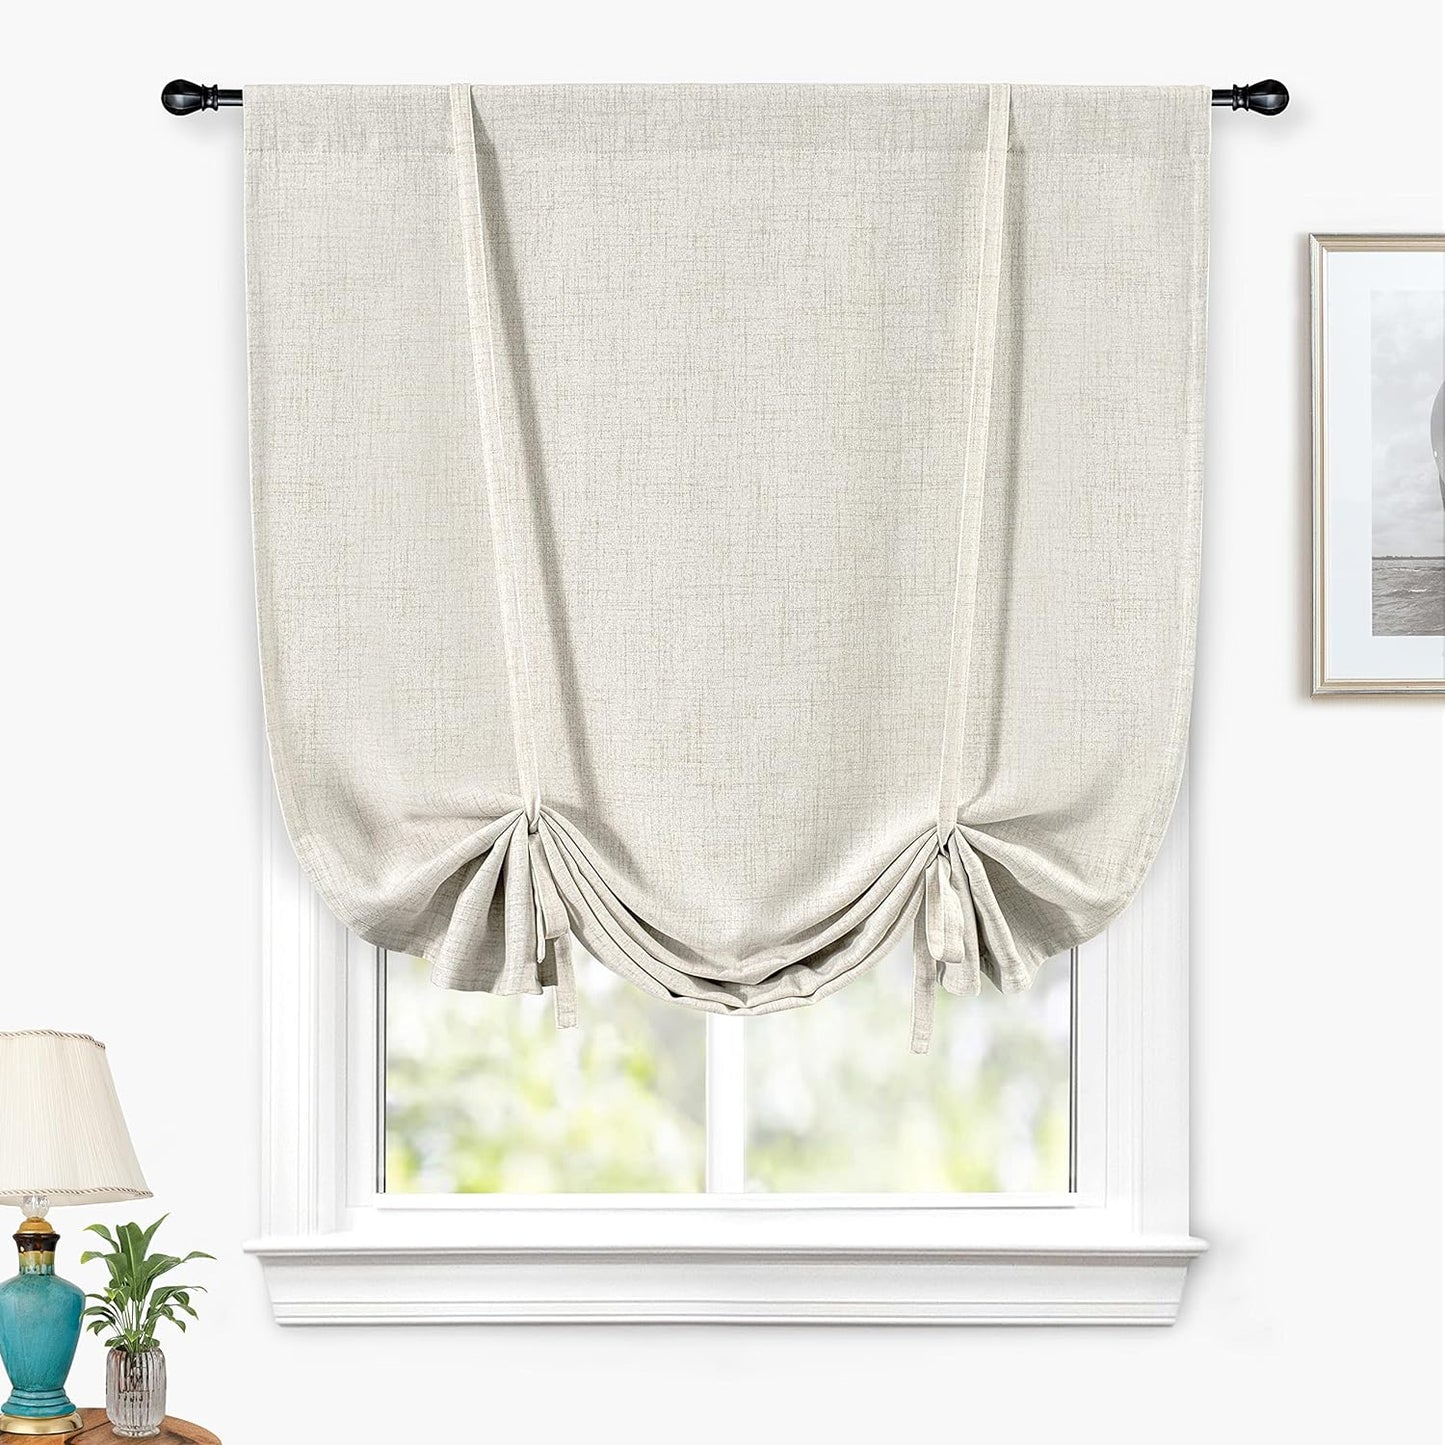 Driftaway Blackout Linen Textured Solid Basic Room Darkening Thermal Insulated Tie up Adjustable Balloon Rod Pocket Linen Curtains for Small Window 25 Inch by 47 Inch Light Linen  DriftAway Light Linen 39"X55" 